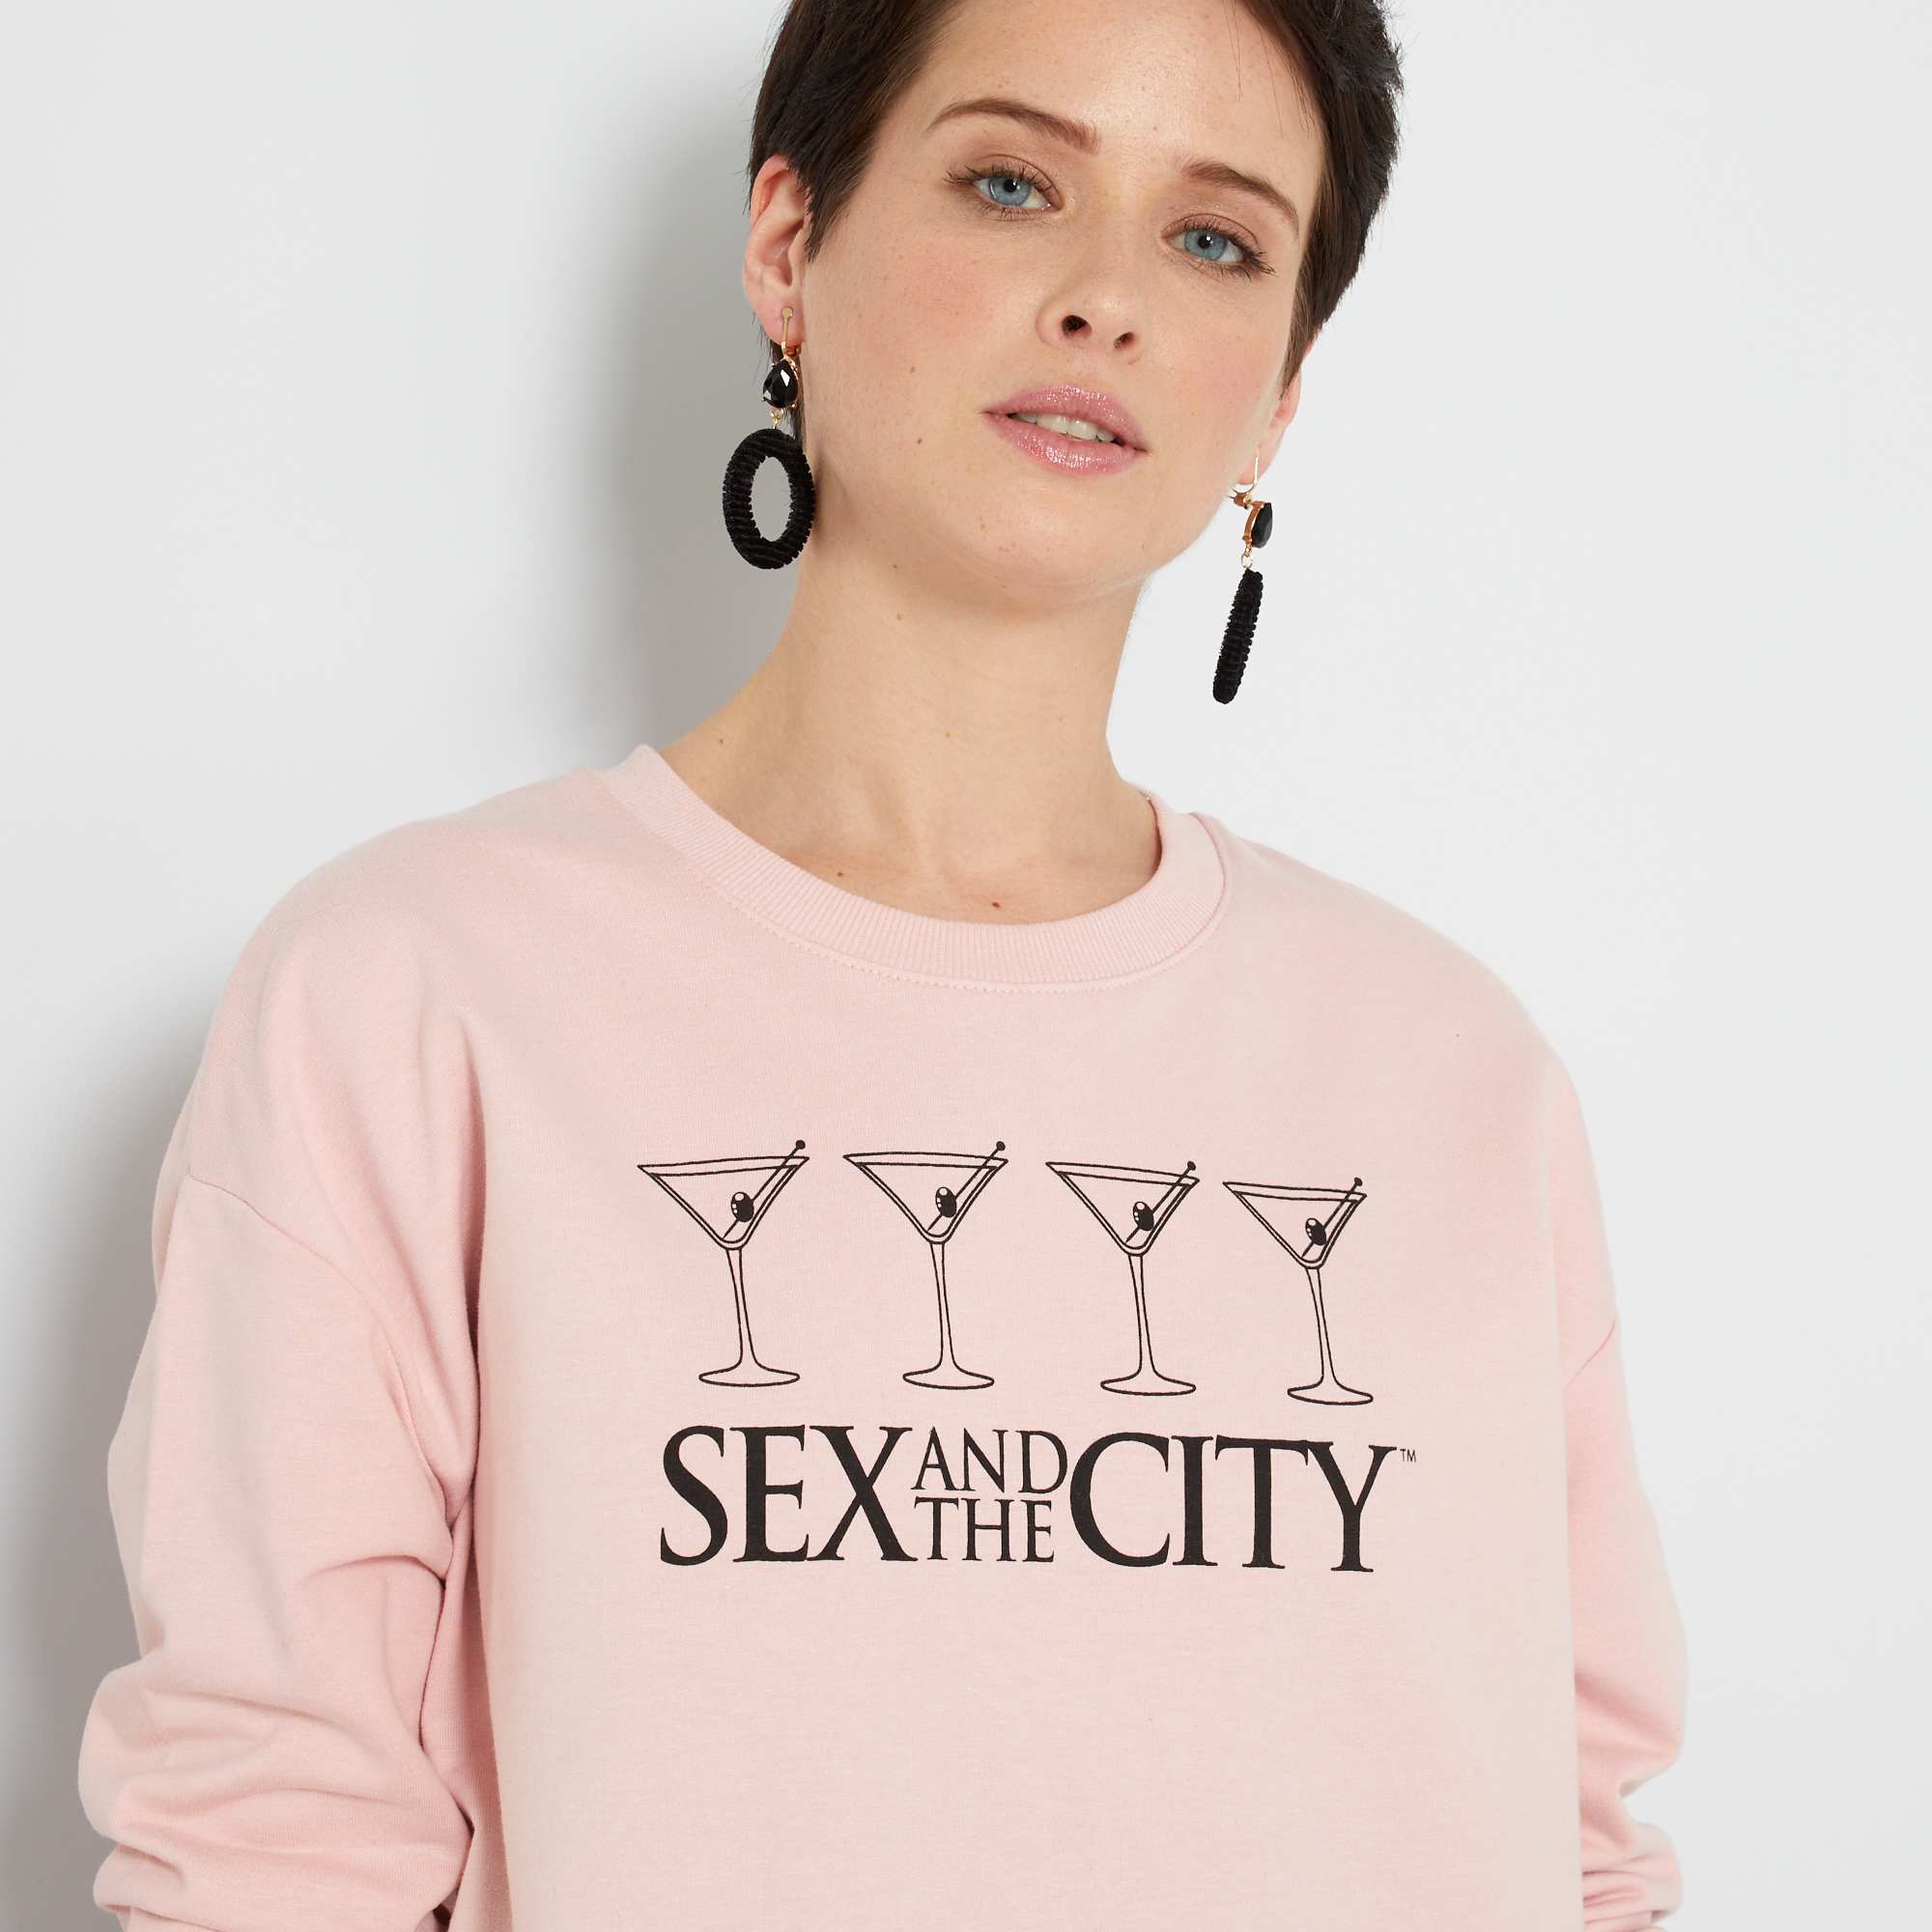 Sweater Sex And The City Femme Rose Kiabi 450€ 8882